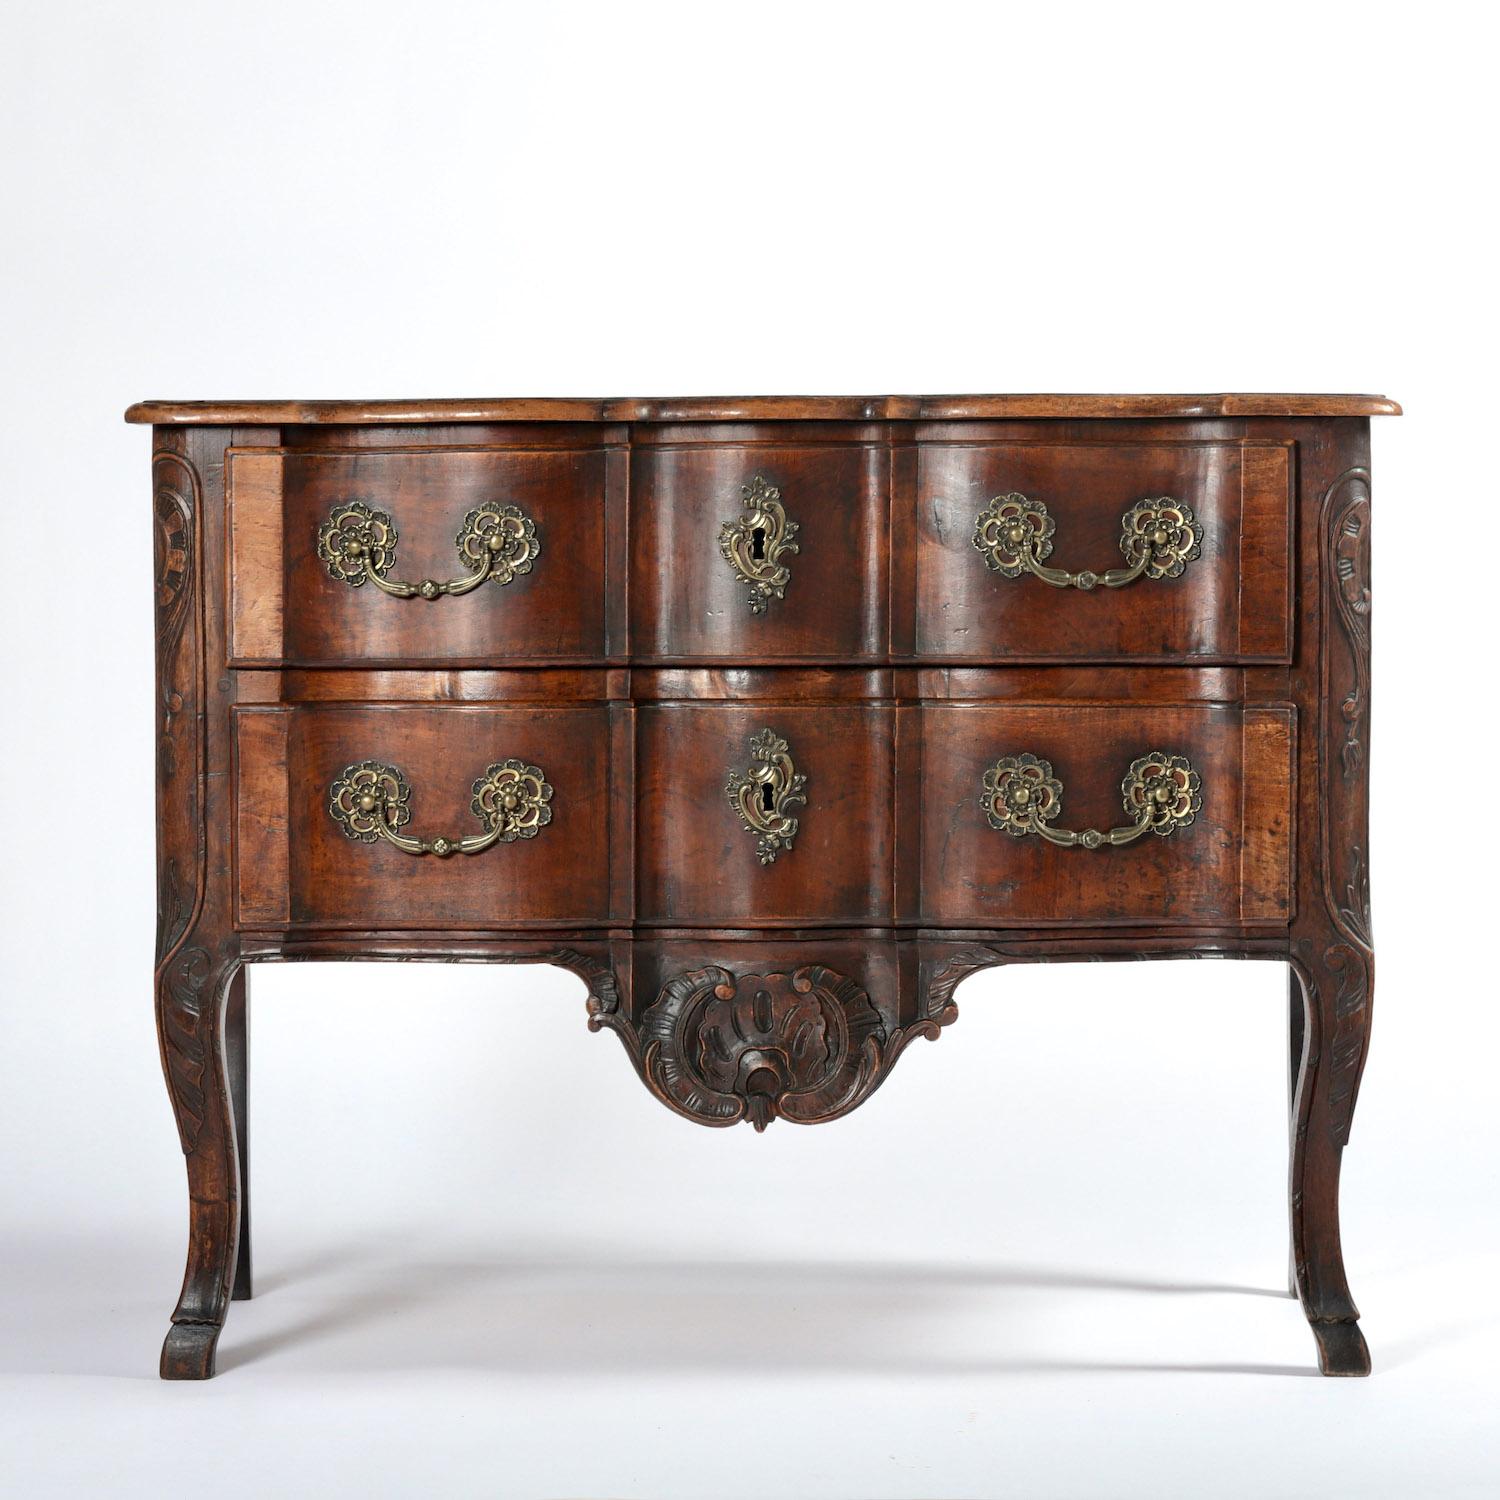 Vagabond Antiques presents an 18th century walnut commode

France, circa 1750

” A solid walnut commode, the timbers have a deep, rich, natural colour “
